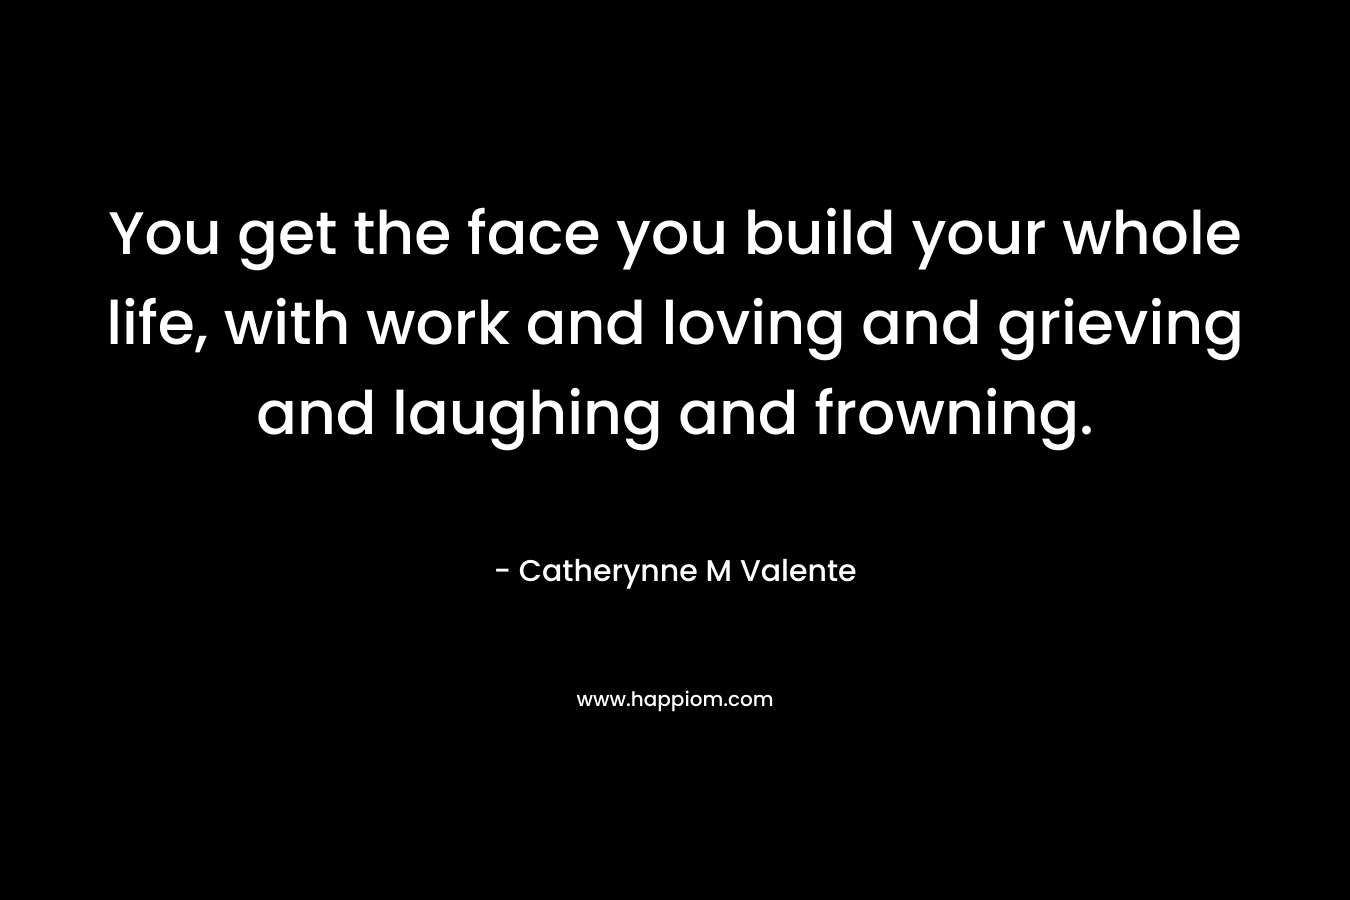 You get the face you build your whole life, with work and loving and grieving and laughing and frowning. – Catherynne M Valente